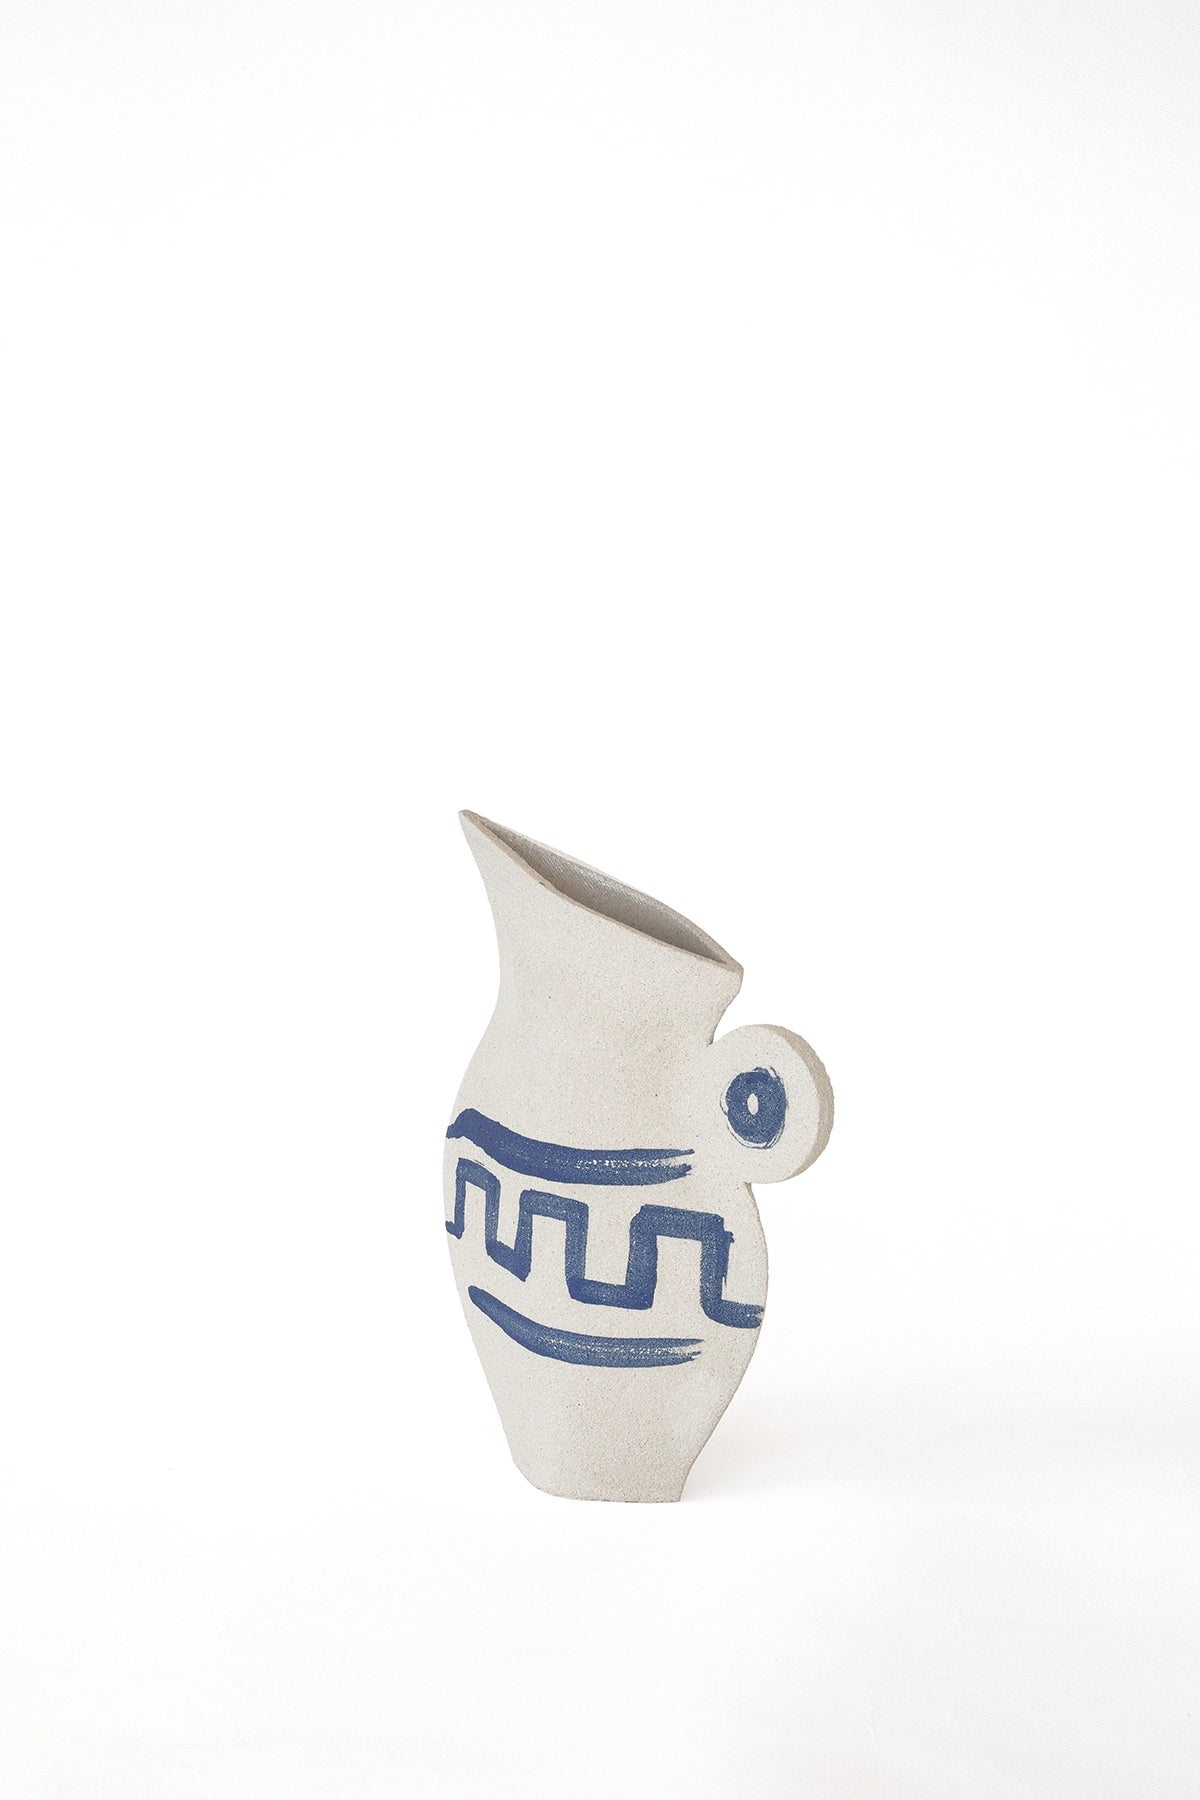 Back from Greece • Ceramic pitcher